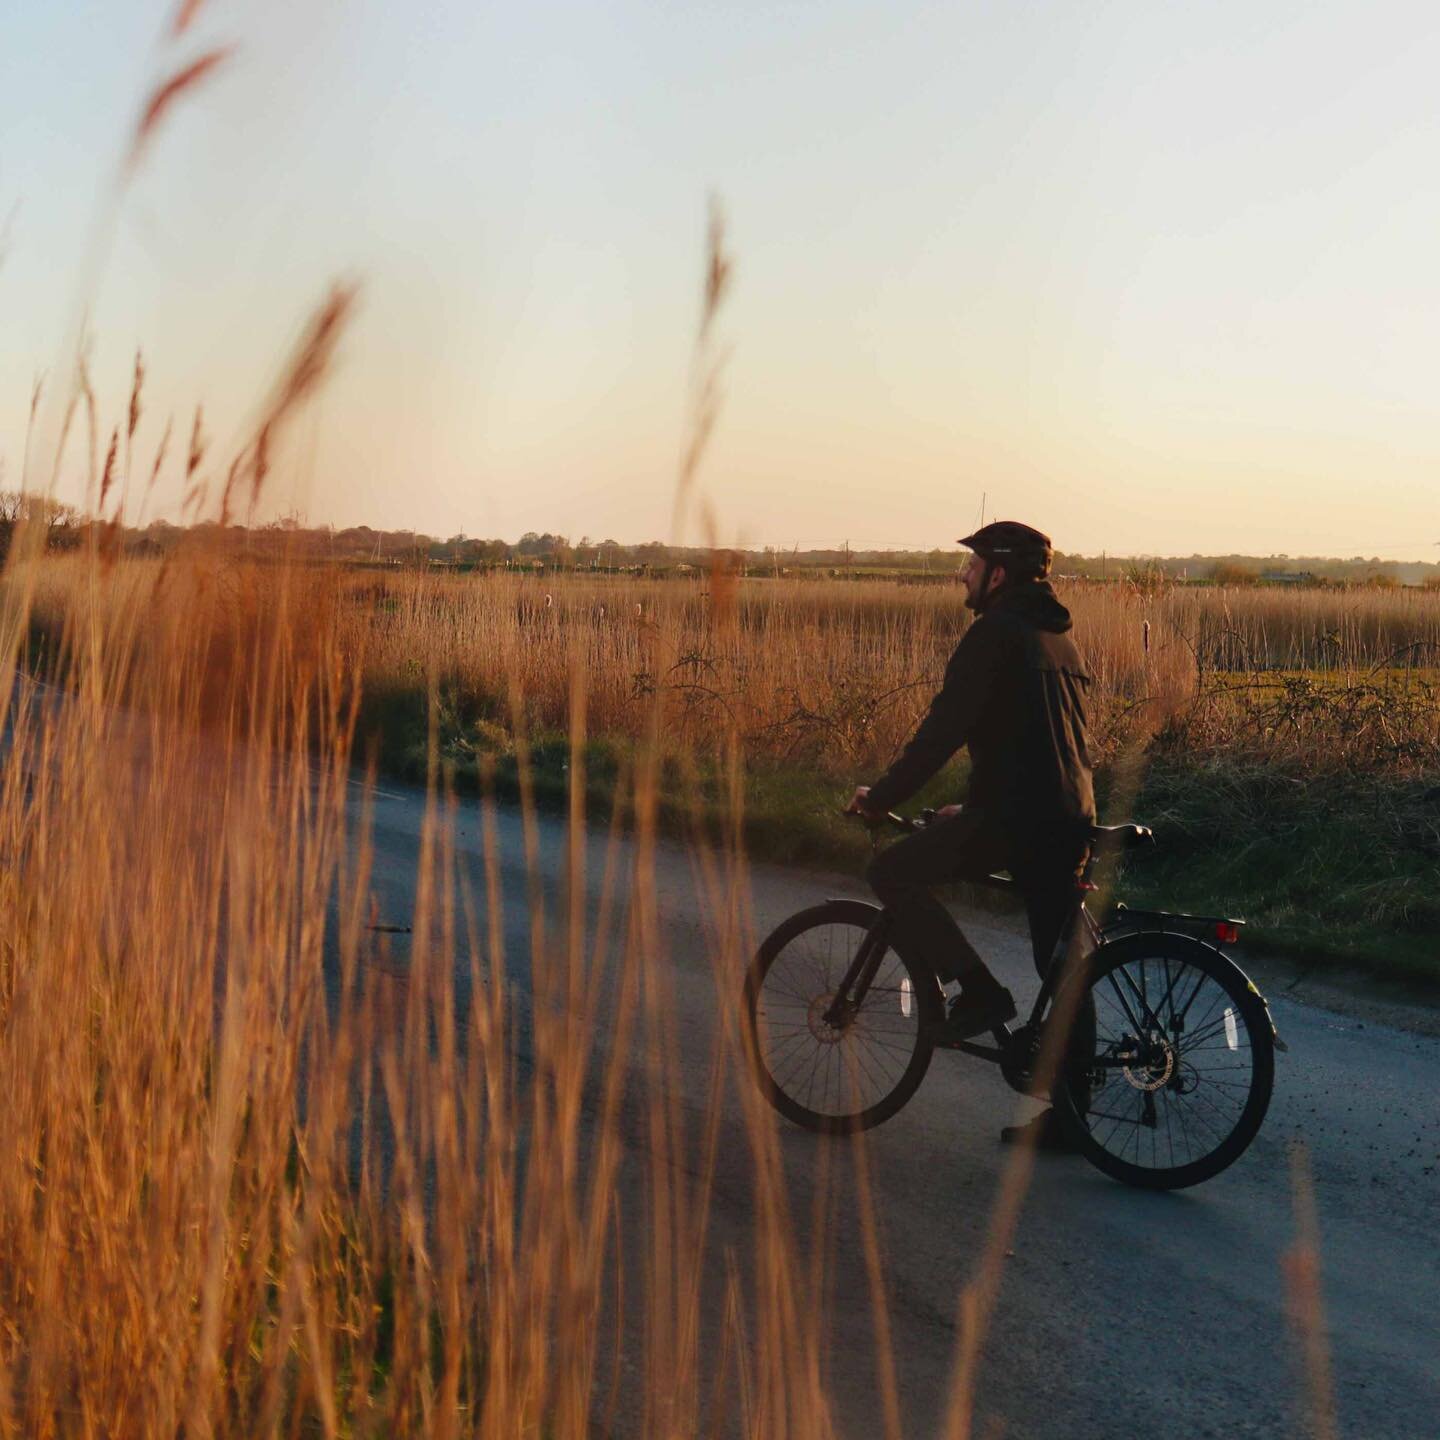 See our map and bike route from Southwold to Walberswick https://www.southwoldcyclehire.co.uk/journal/southwold-to-walberswick-bike-ride#

Photo by @rosielitterick 

#southwold #southwoldbeach #southwoldharbour #southwoldsuffolk